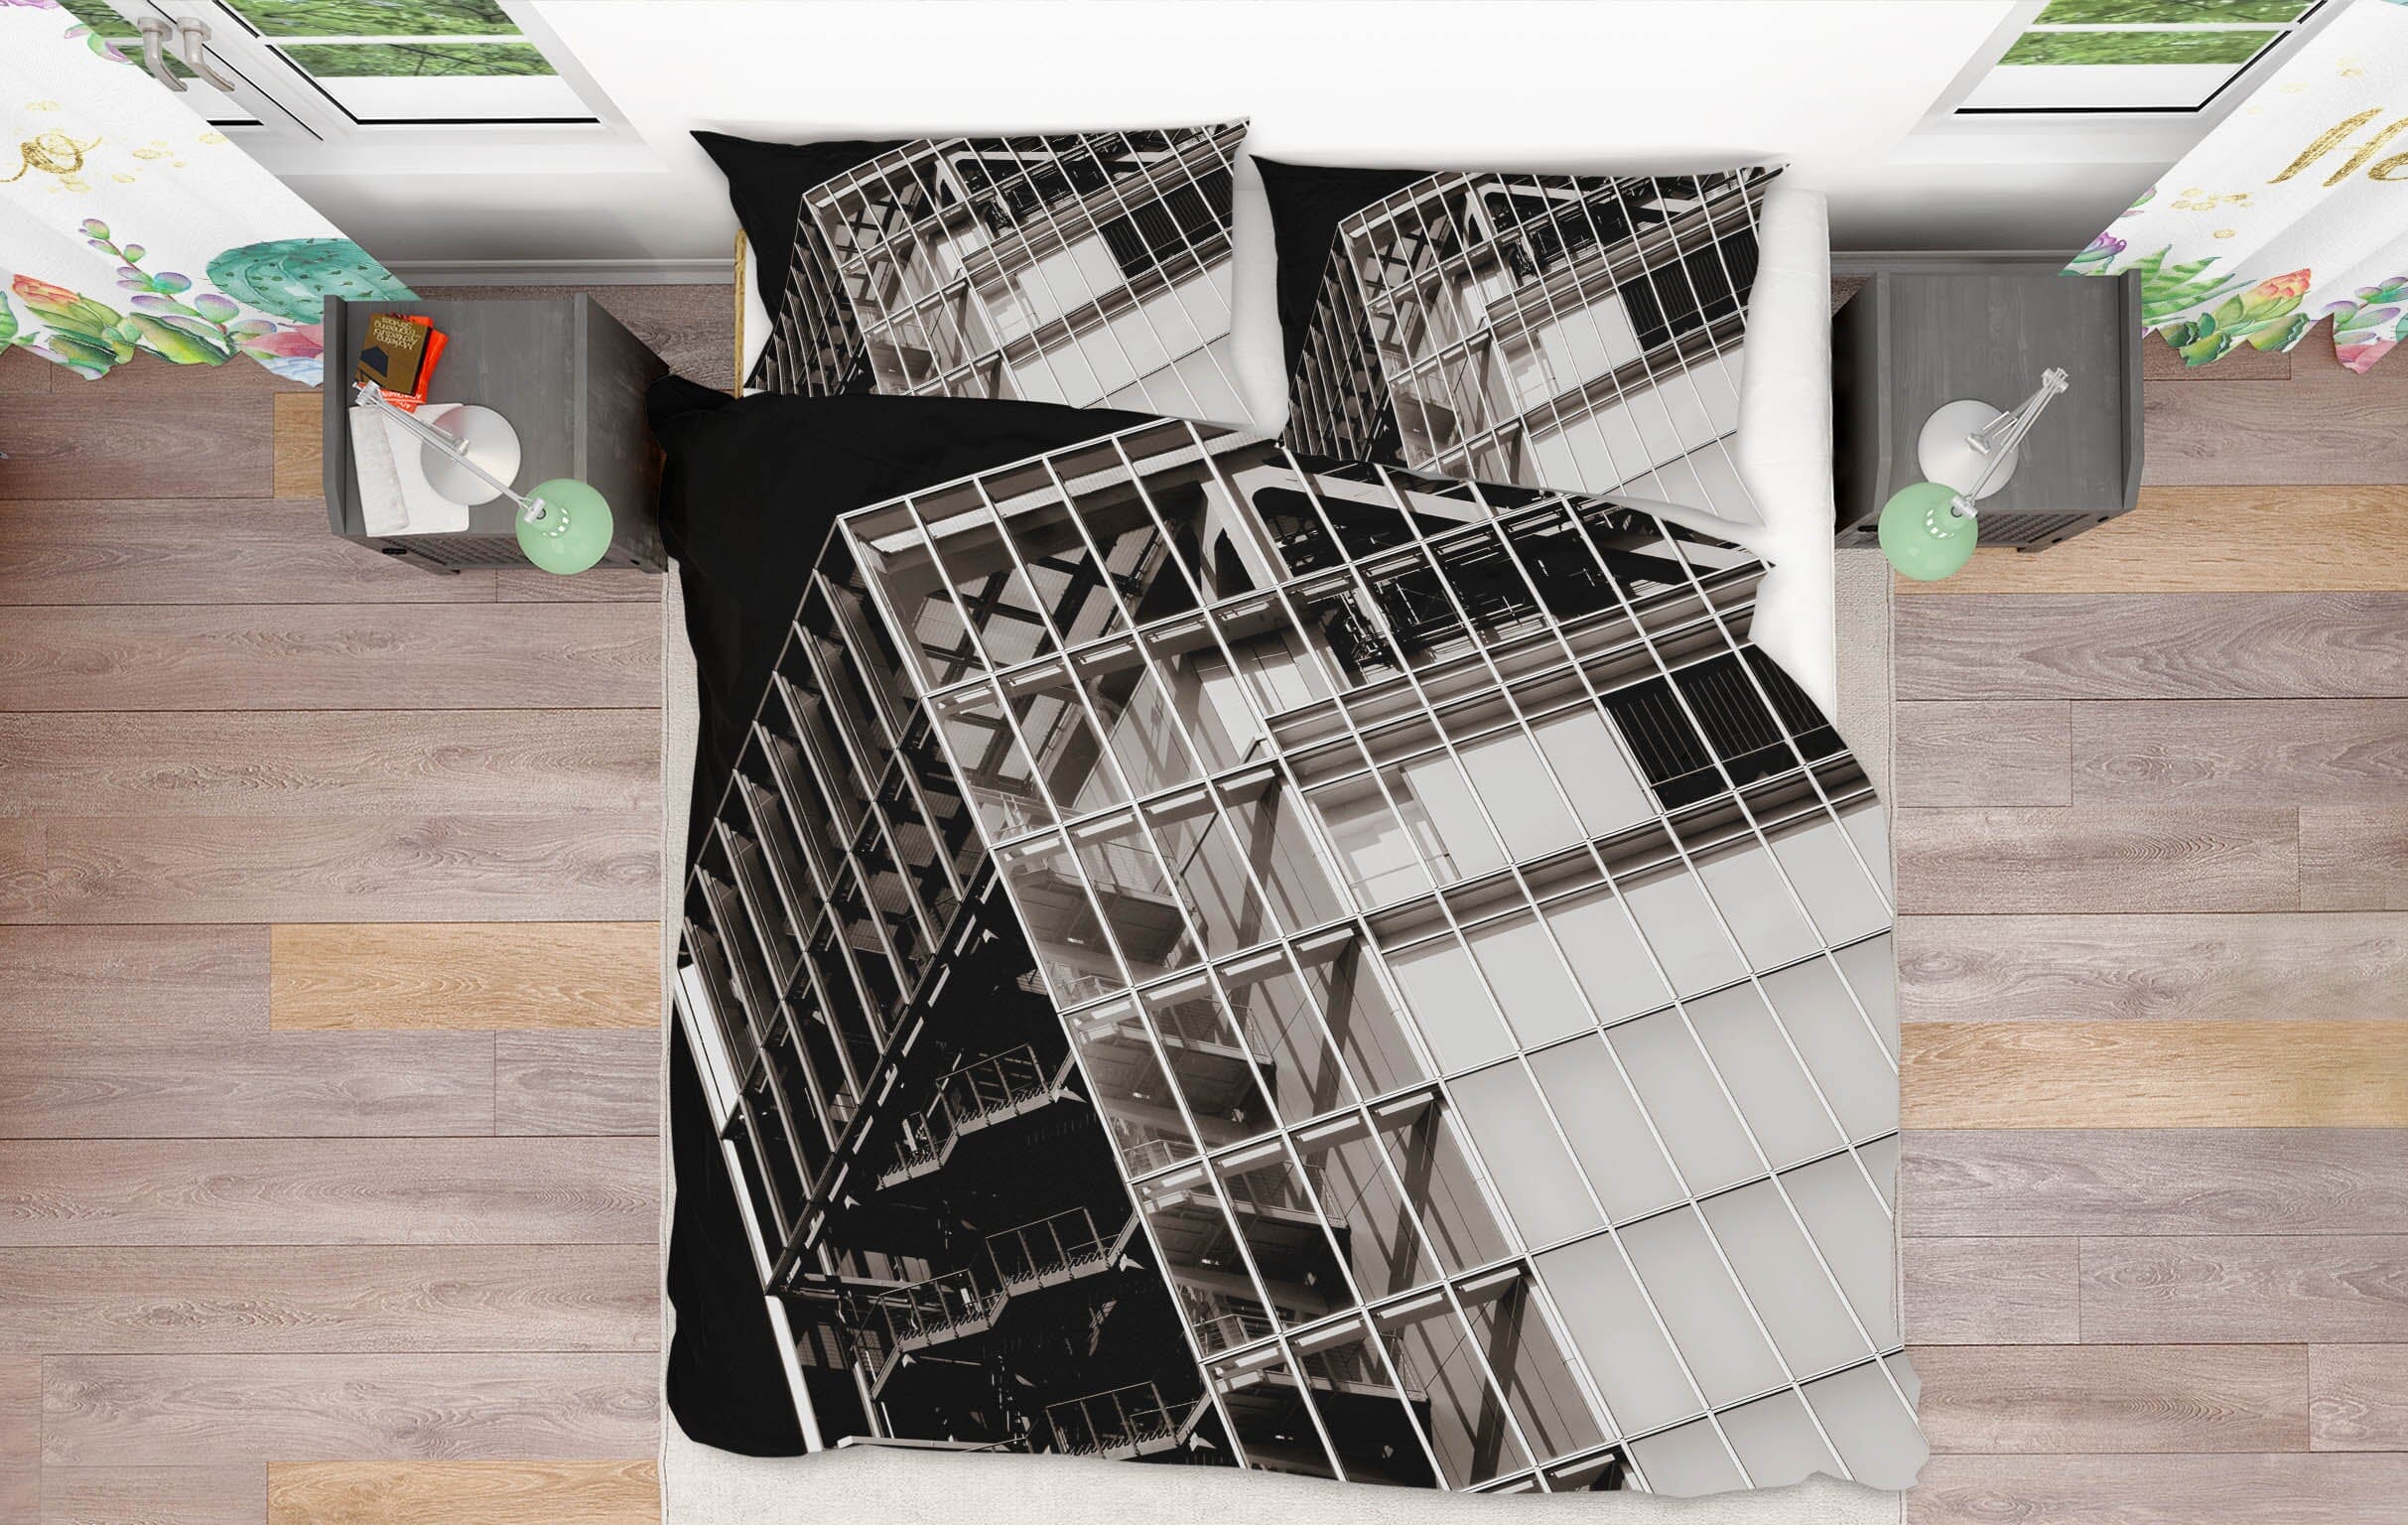 3D Tilted Building 2008 Noirblanc777 Bedding Bed Pillowcases Quilt Quiet Covers AJ Creativity Home 